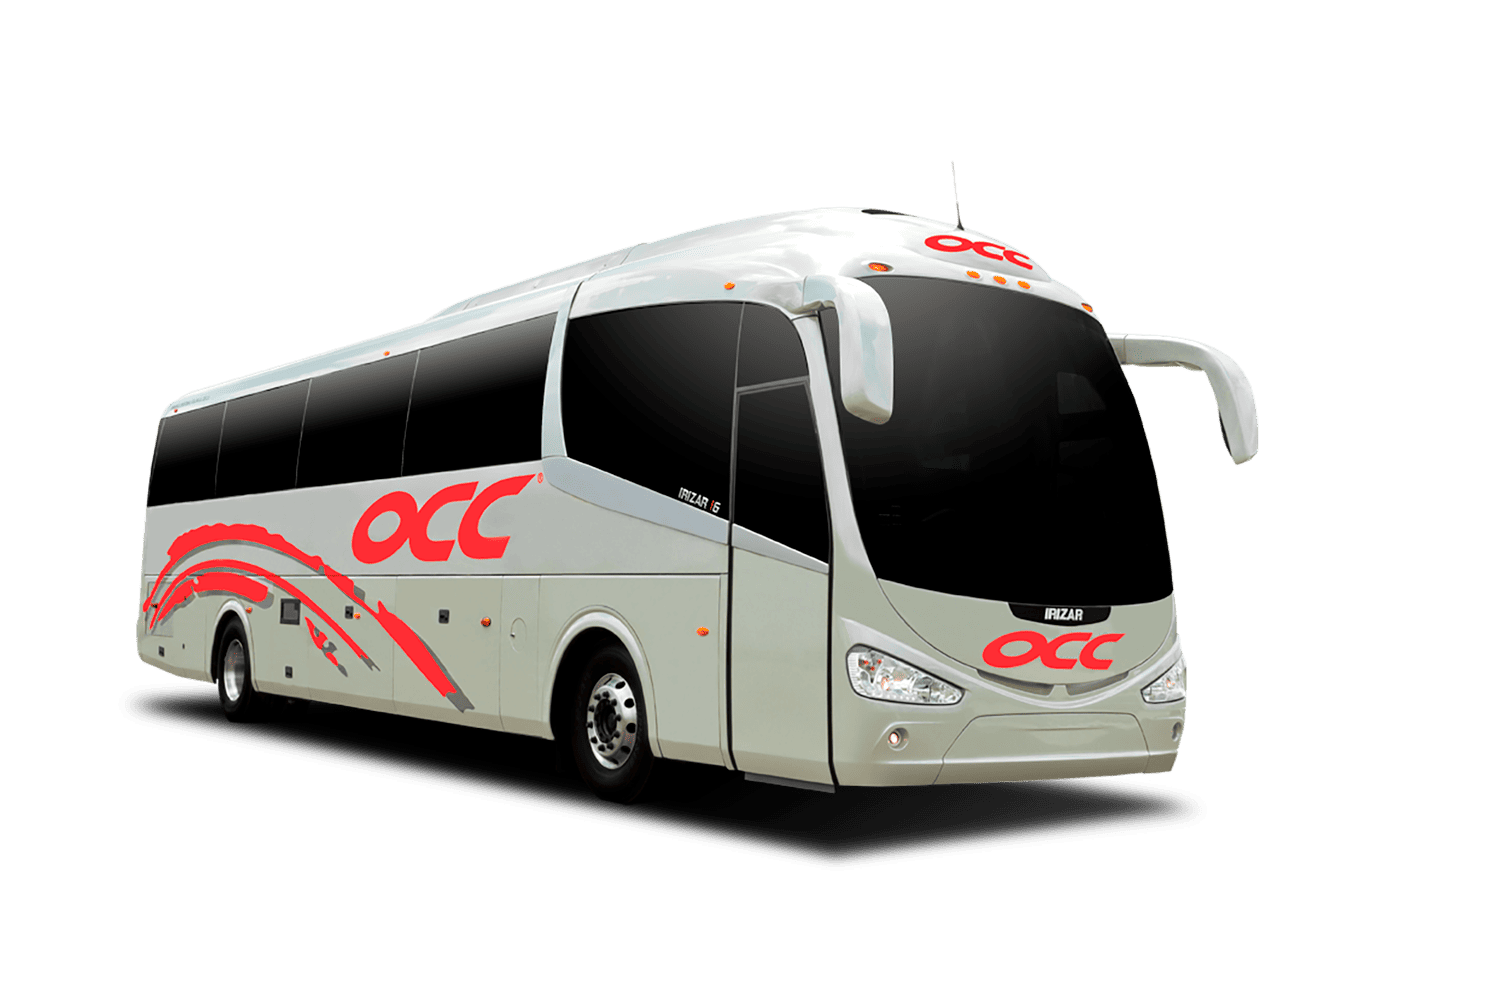 How To Get From Campeche to Merida By Bus - All Possible Ways, cheapest way from Campeche to Merida, Campeche to Merida, OCC bus from Campeche to Merida, ado bus from Campeche to Merida, shared van from Campeche to Merida, Colectivo from Campeche to Merida, Uber from Campeche to Merida, taxi from Campeche to Merida, Campeche to Merida by plane